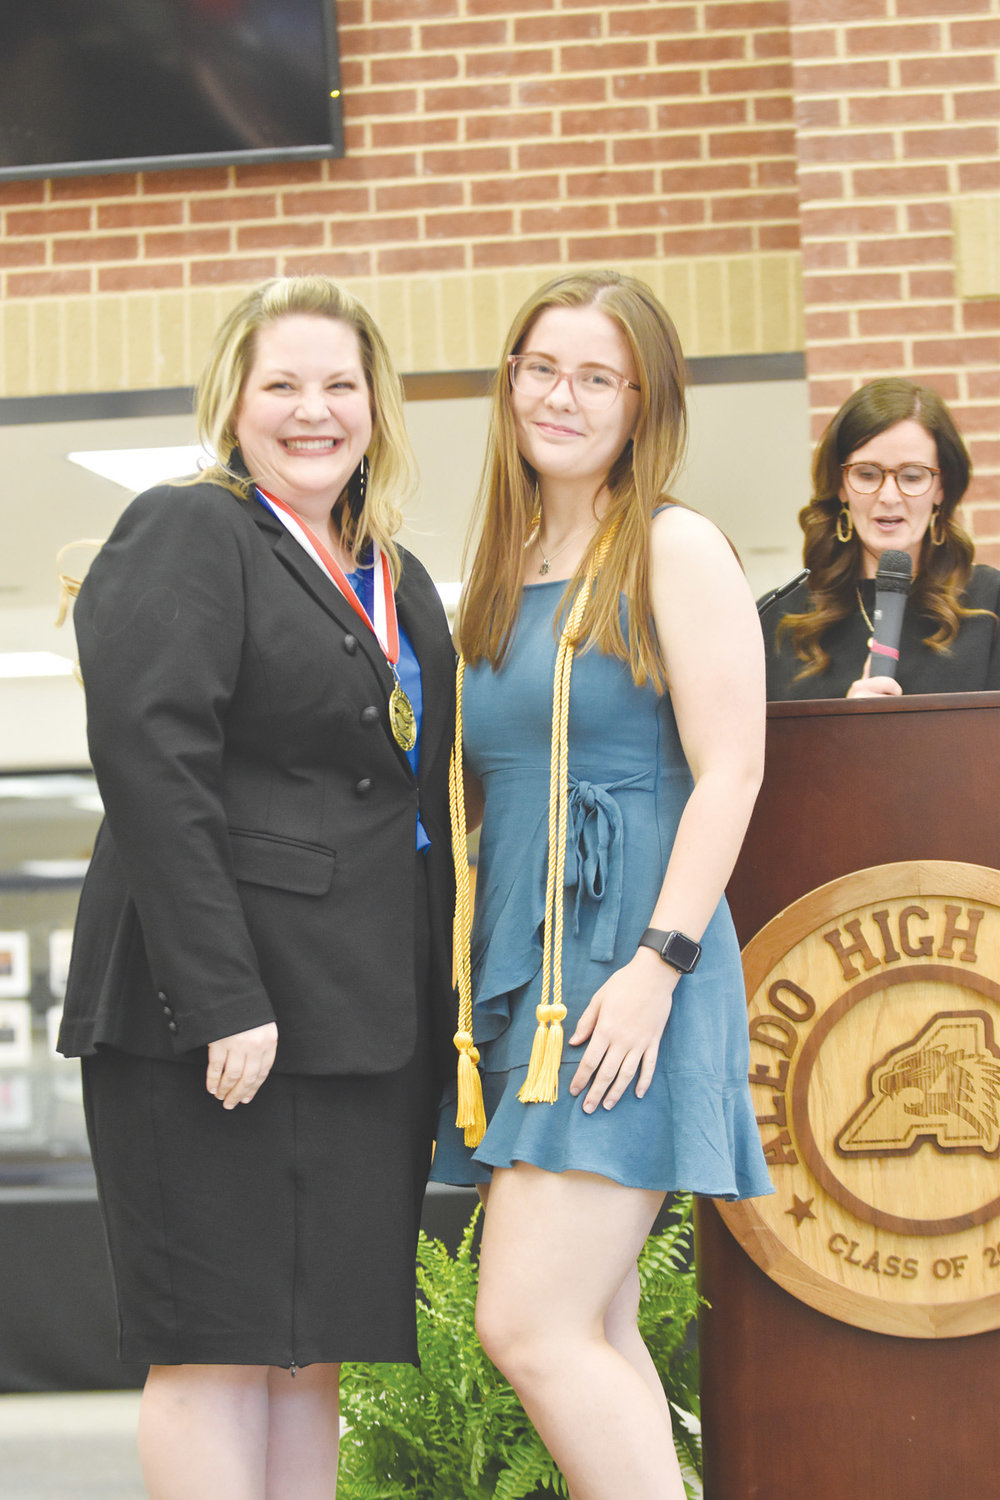 Madeline Hinckley is the daughter of Dennis and Deb Degner. She plans to attend Texas A&M University, major in allied health, and become a nurse. She honored Mrs. Amber Wheeler.